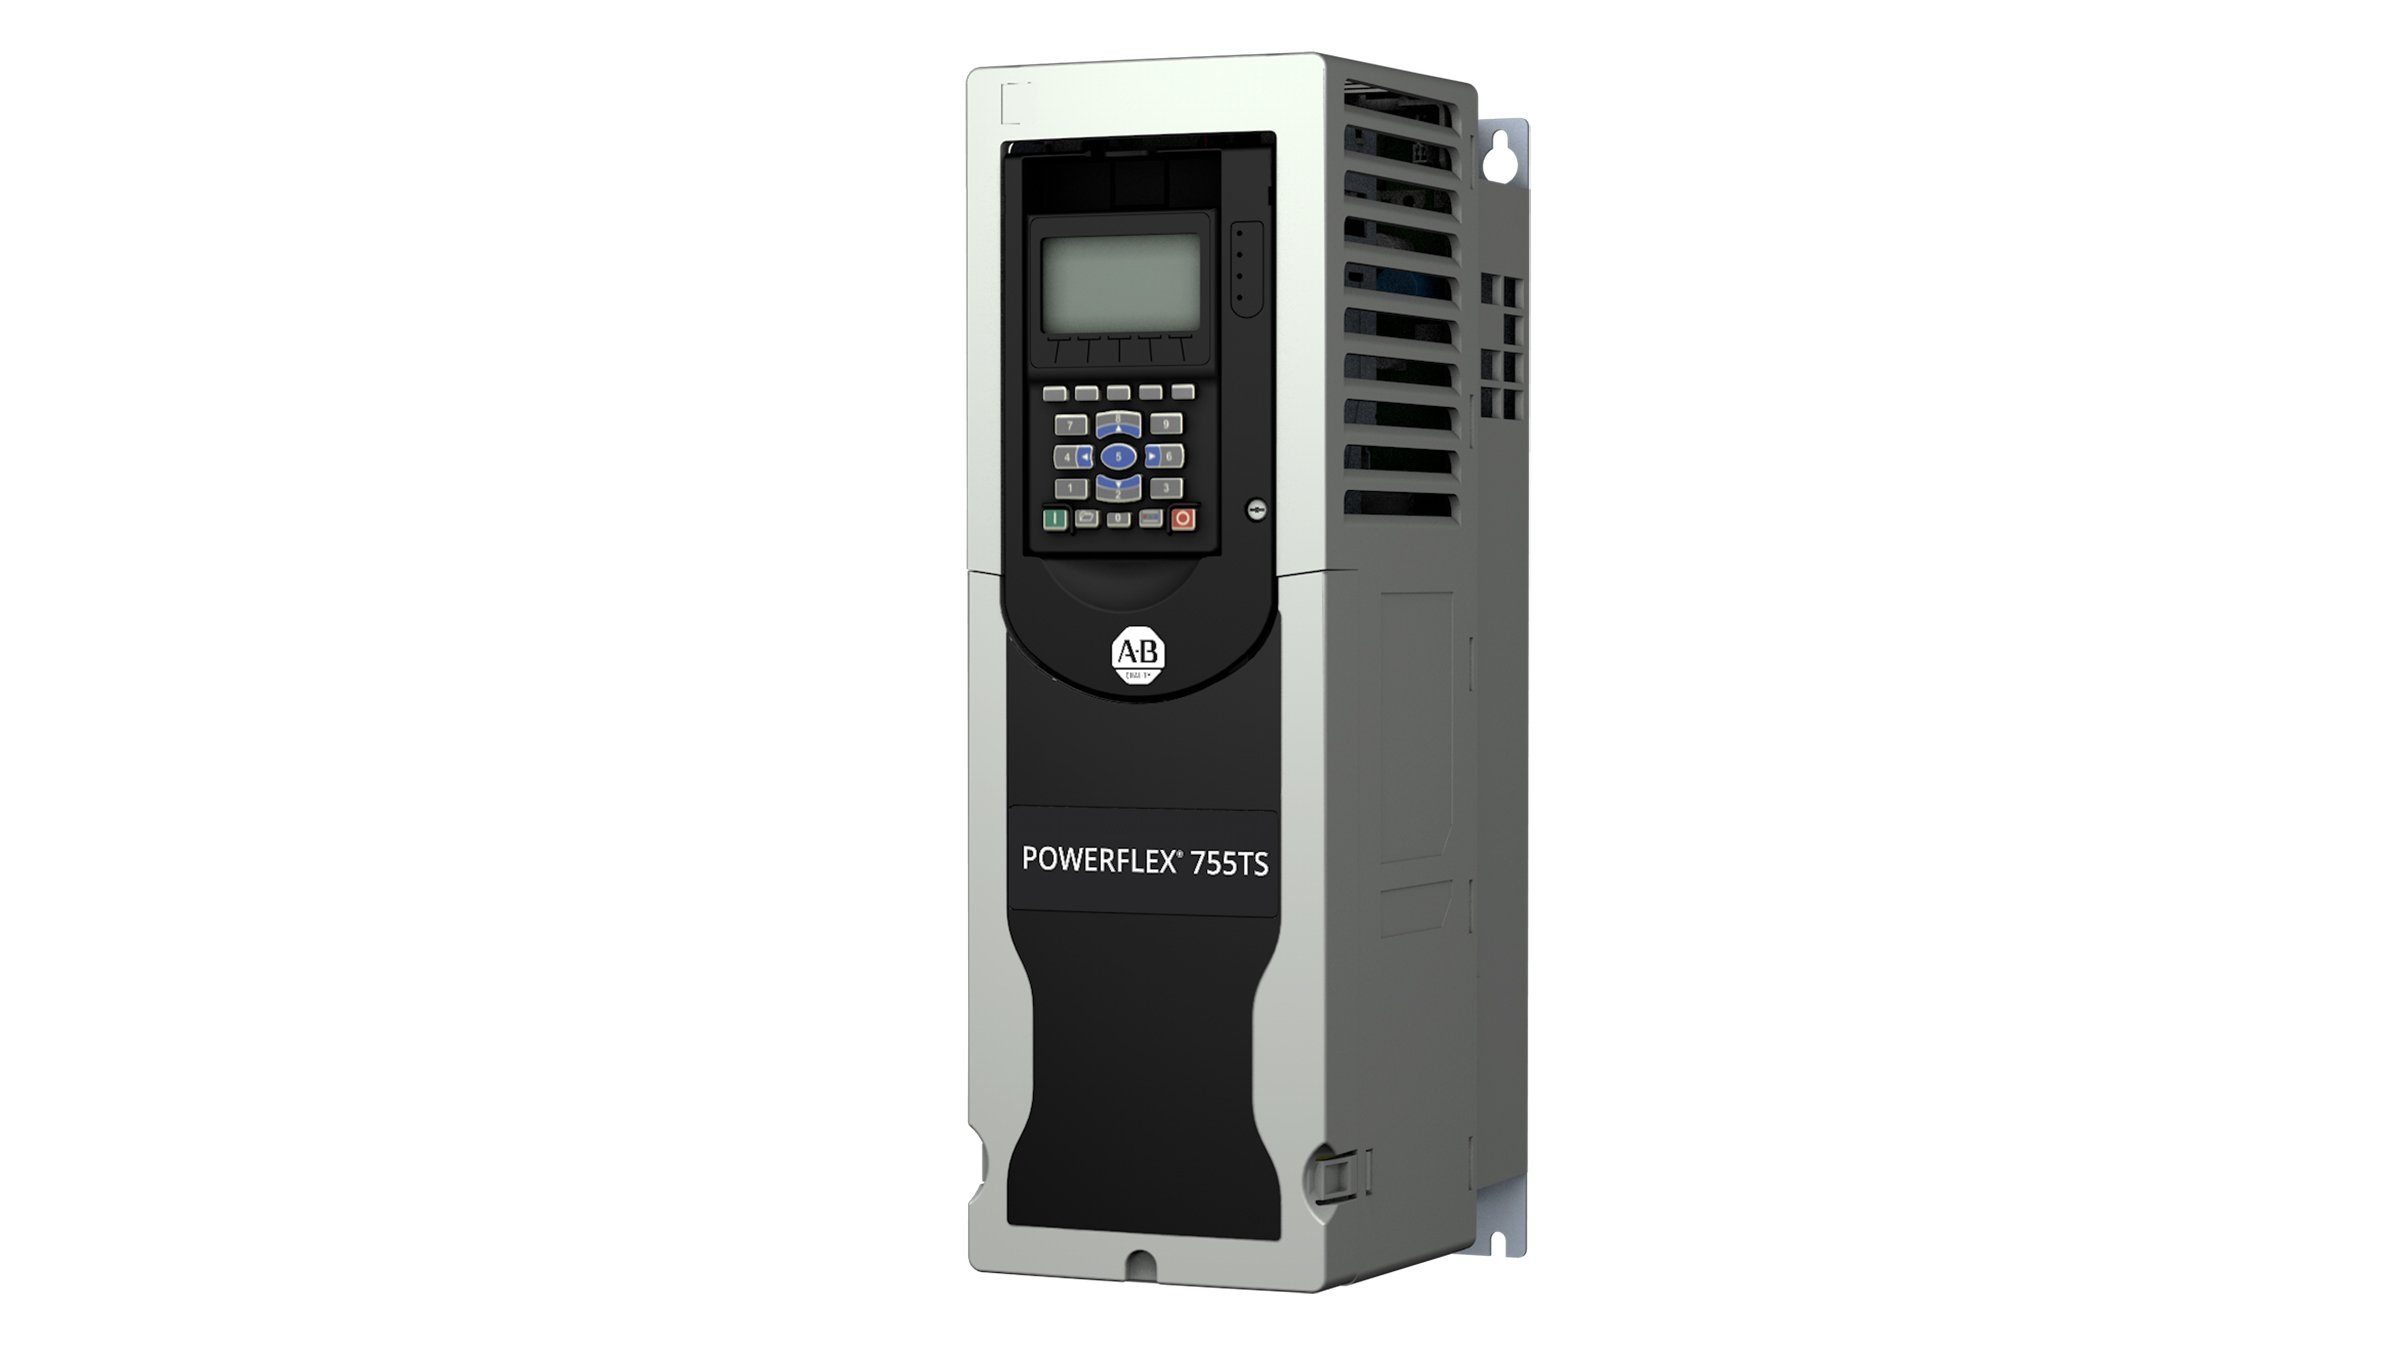 Light grey rectangular PowerFlex 755TS variable frequency drive with buttons on front and a screen